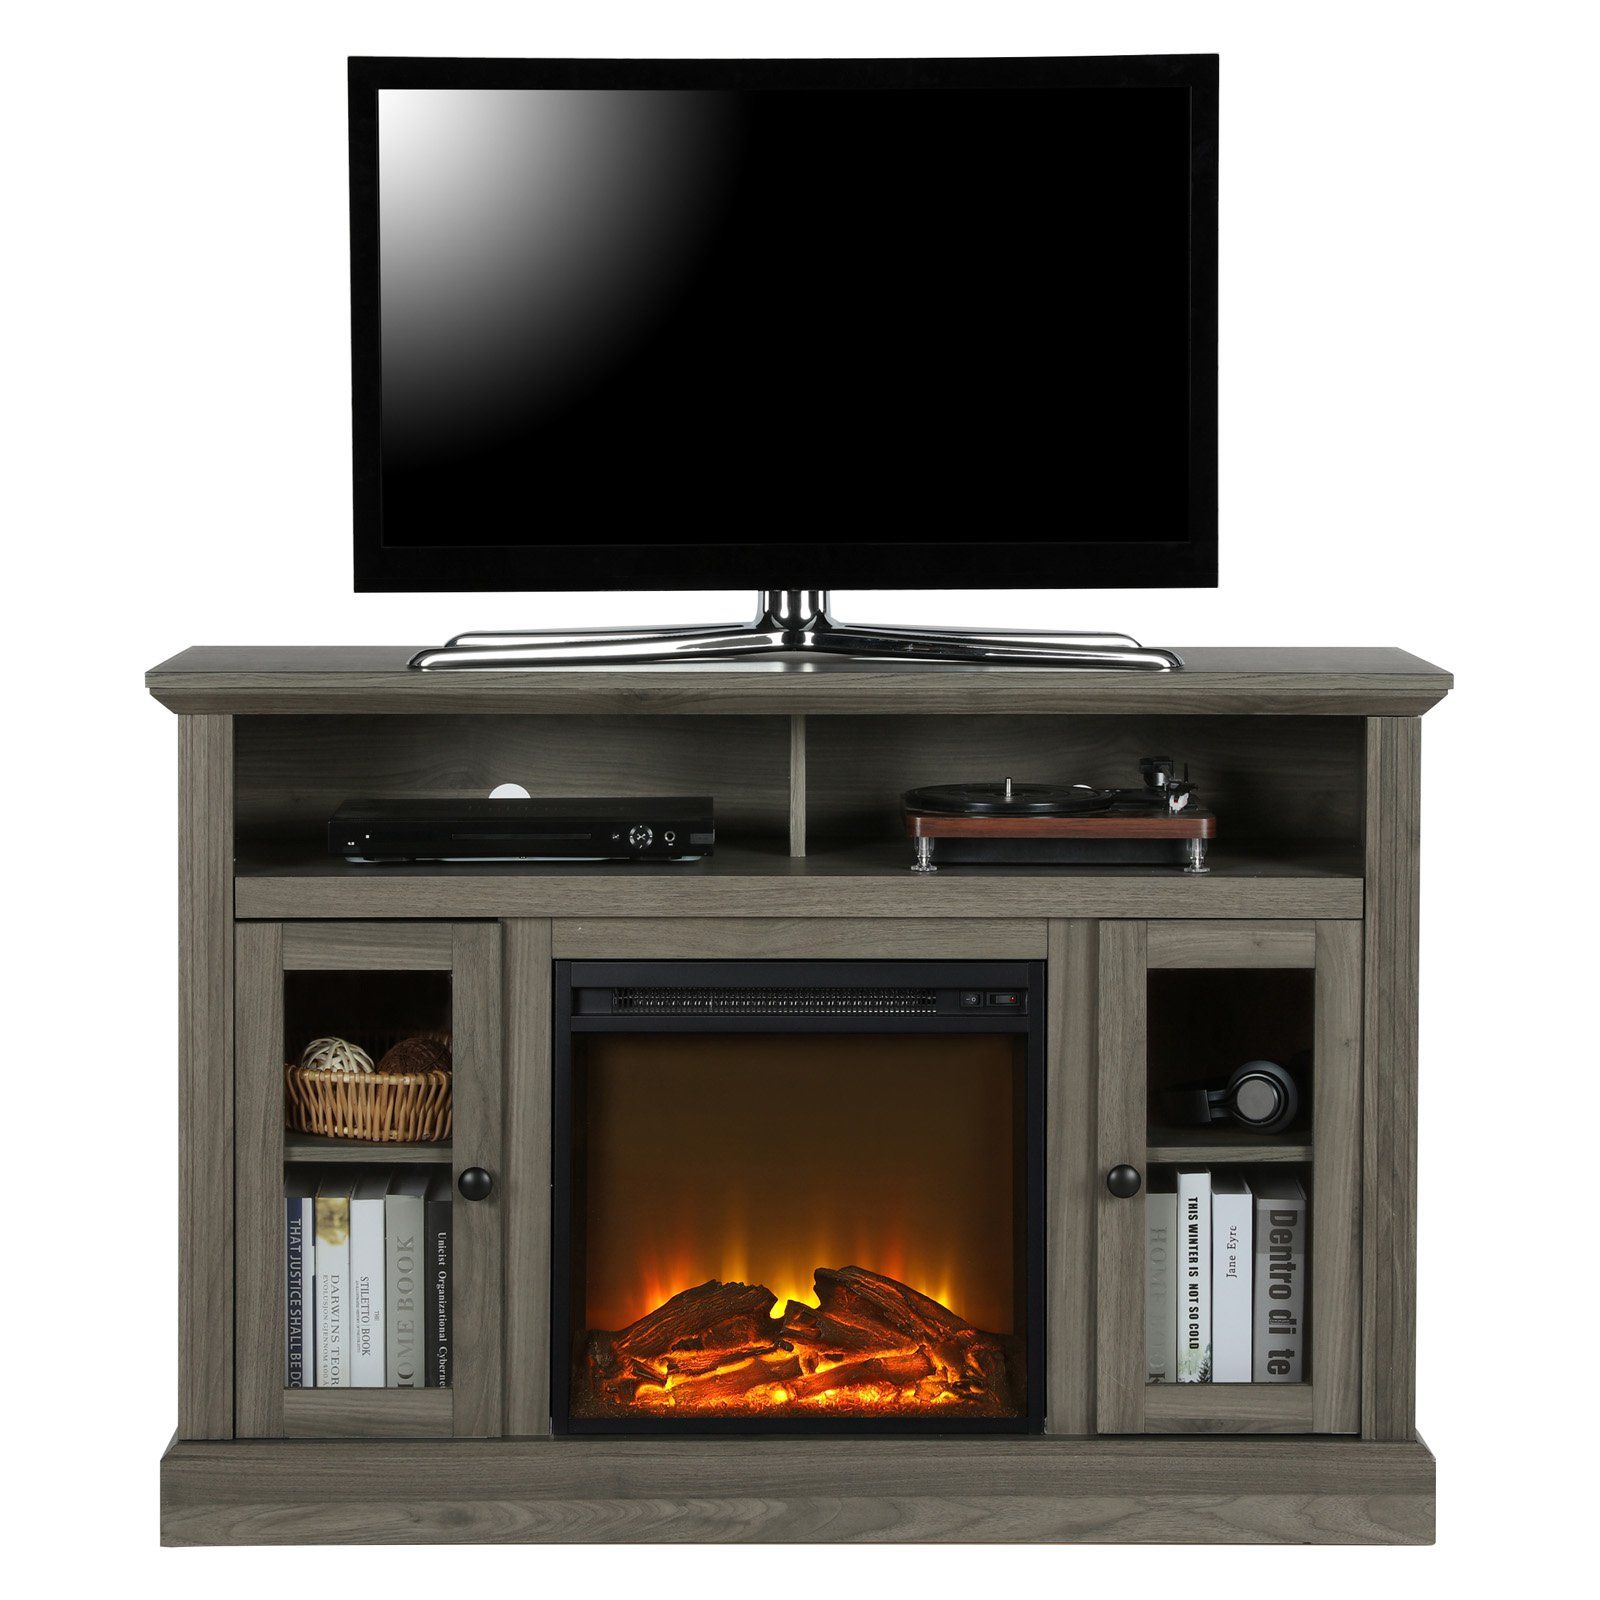 Indoor Fireplace Tv Stand Elegant Ameriwood Home Chicago Electric Fireplace Tv Stand In 2019